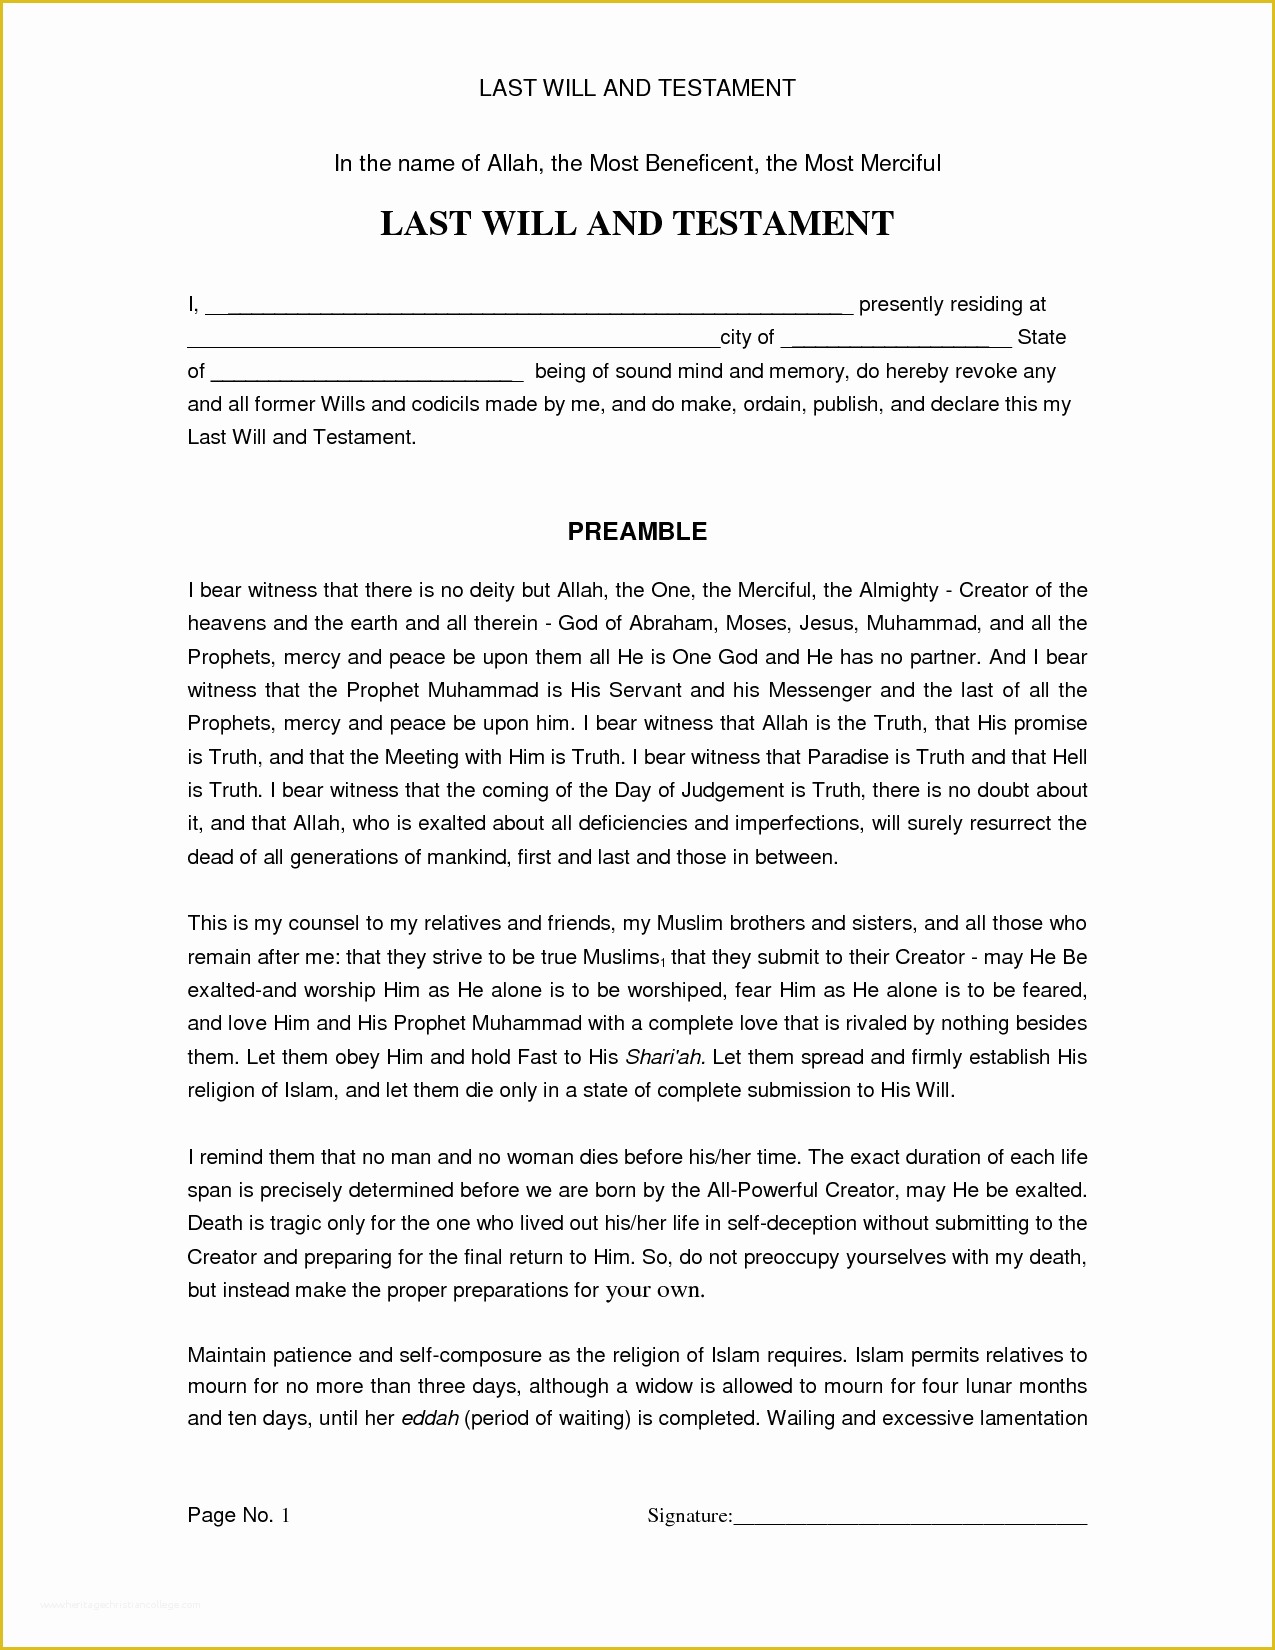 California Last Will and Testament Free Template Of Last Will and Testament Sample Free Printable Documents